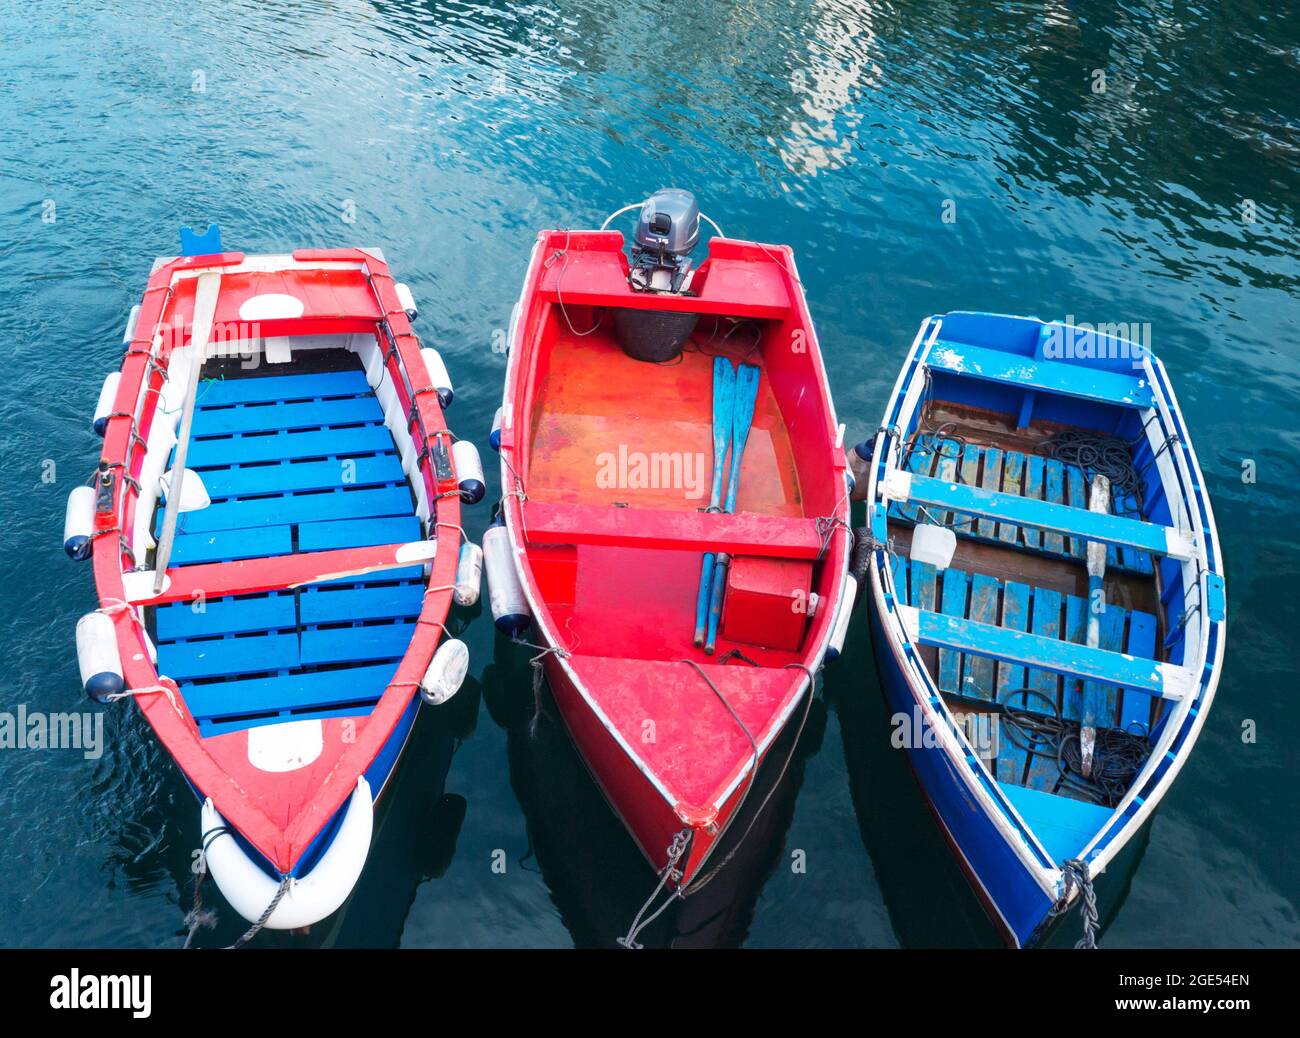 LUARCA, SPAIN - DECEMBER 4, 2016: Three bright painted boats at the fish market pier in Luarca, Spain. Stock Photo